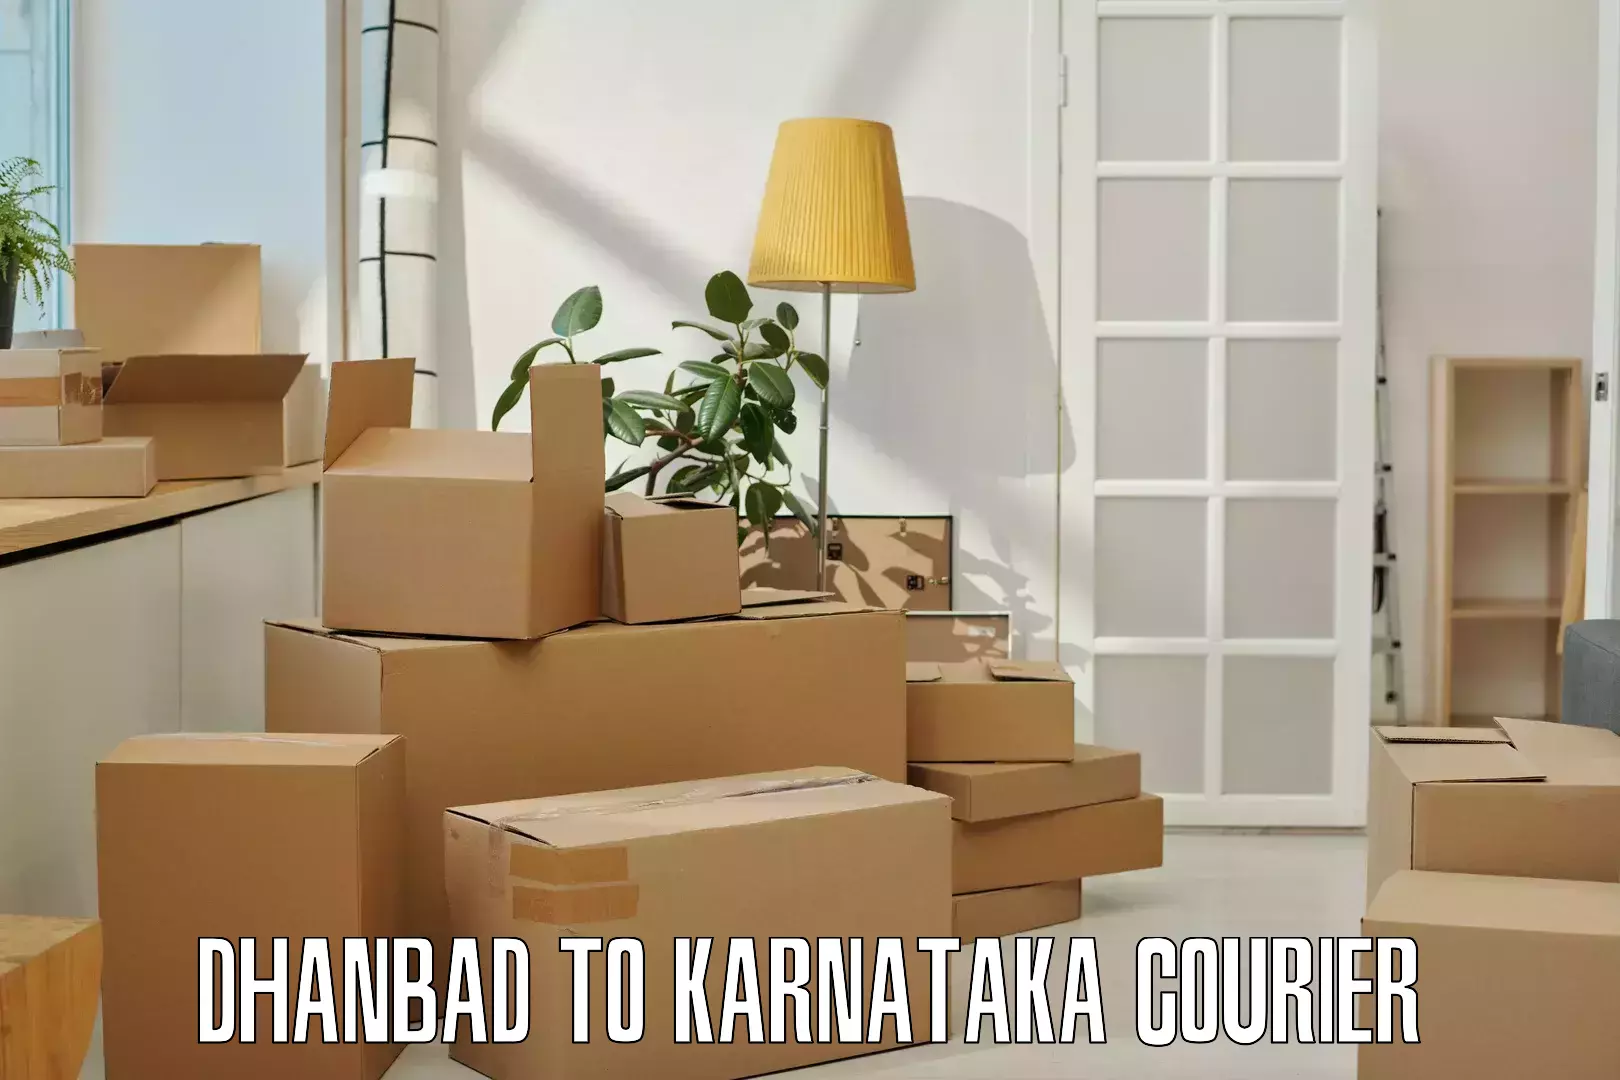 Efficient package consolidation Dhanbad to Devanahalli